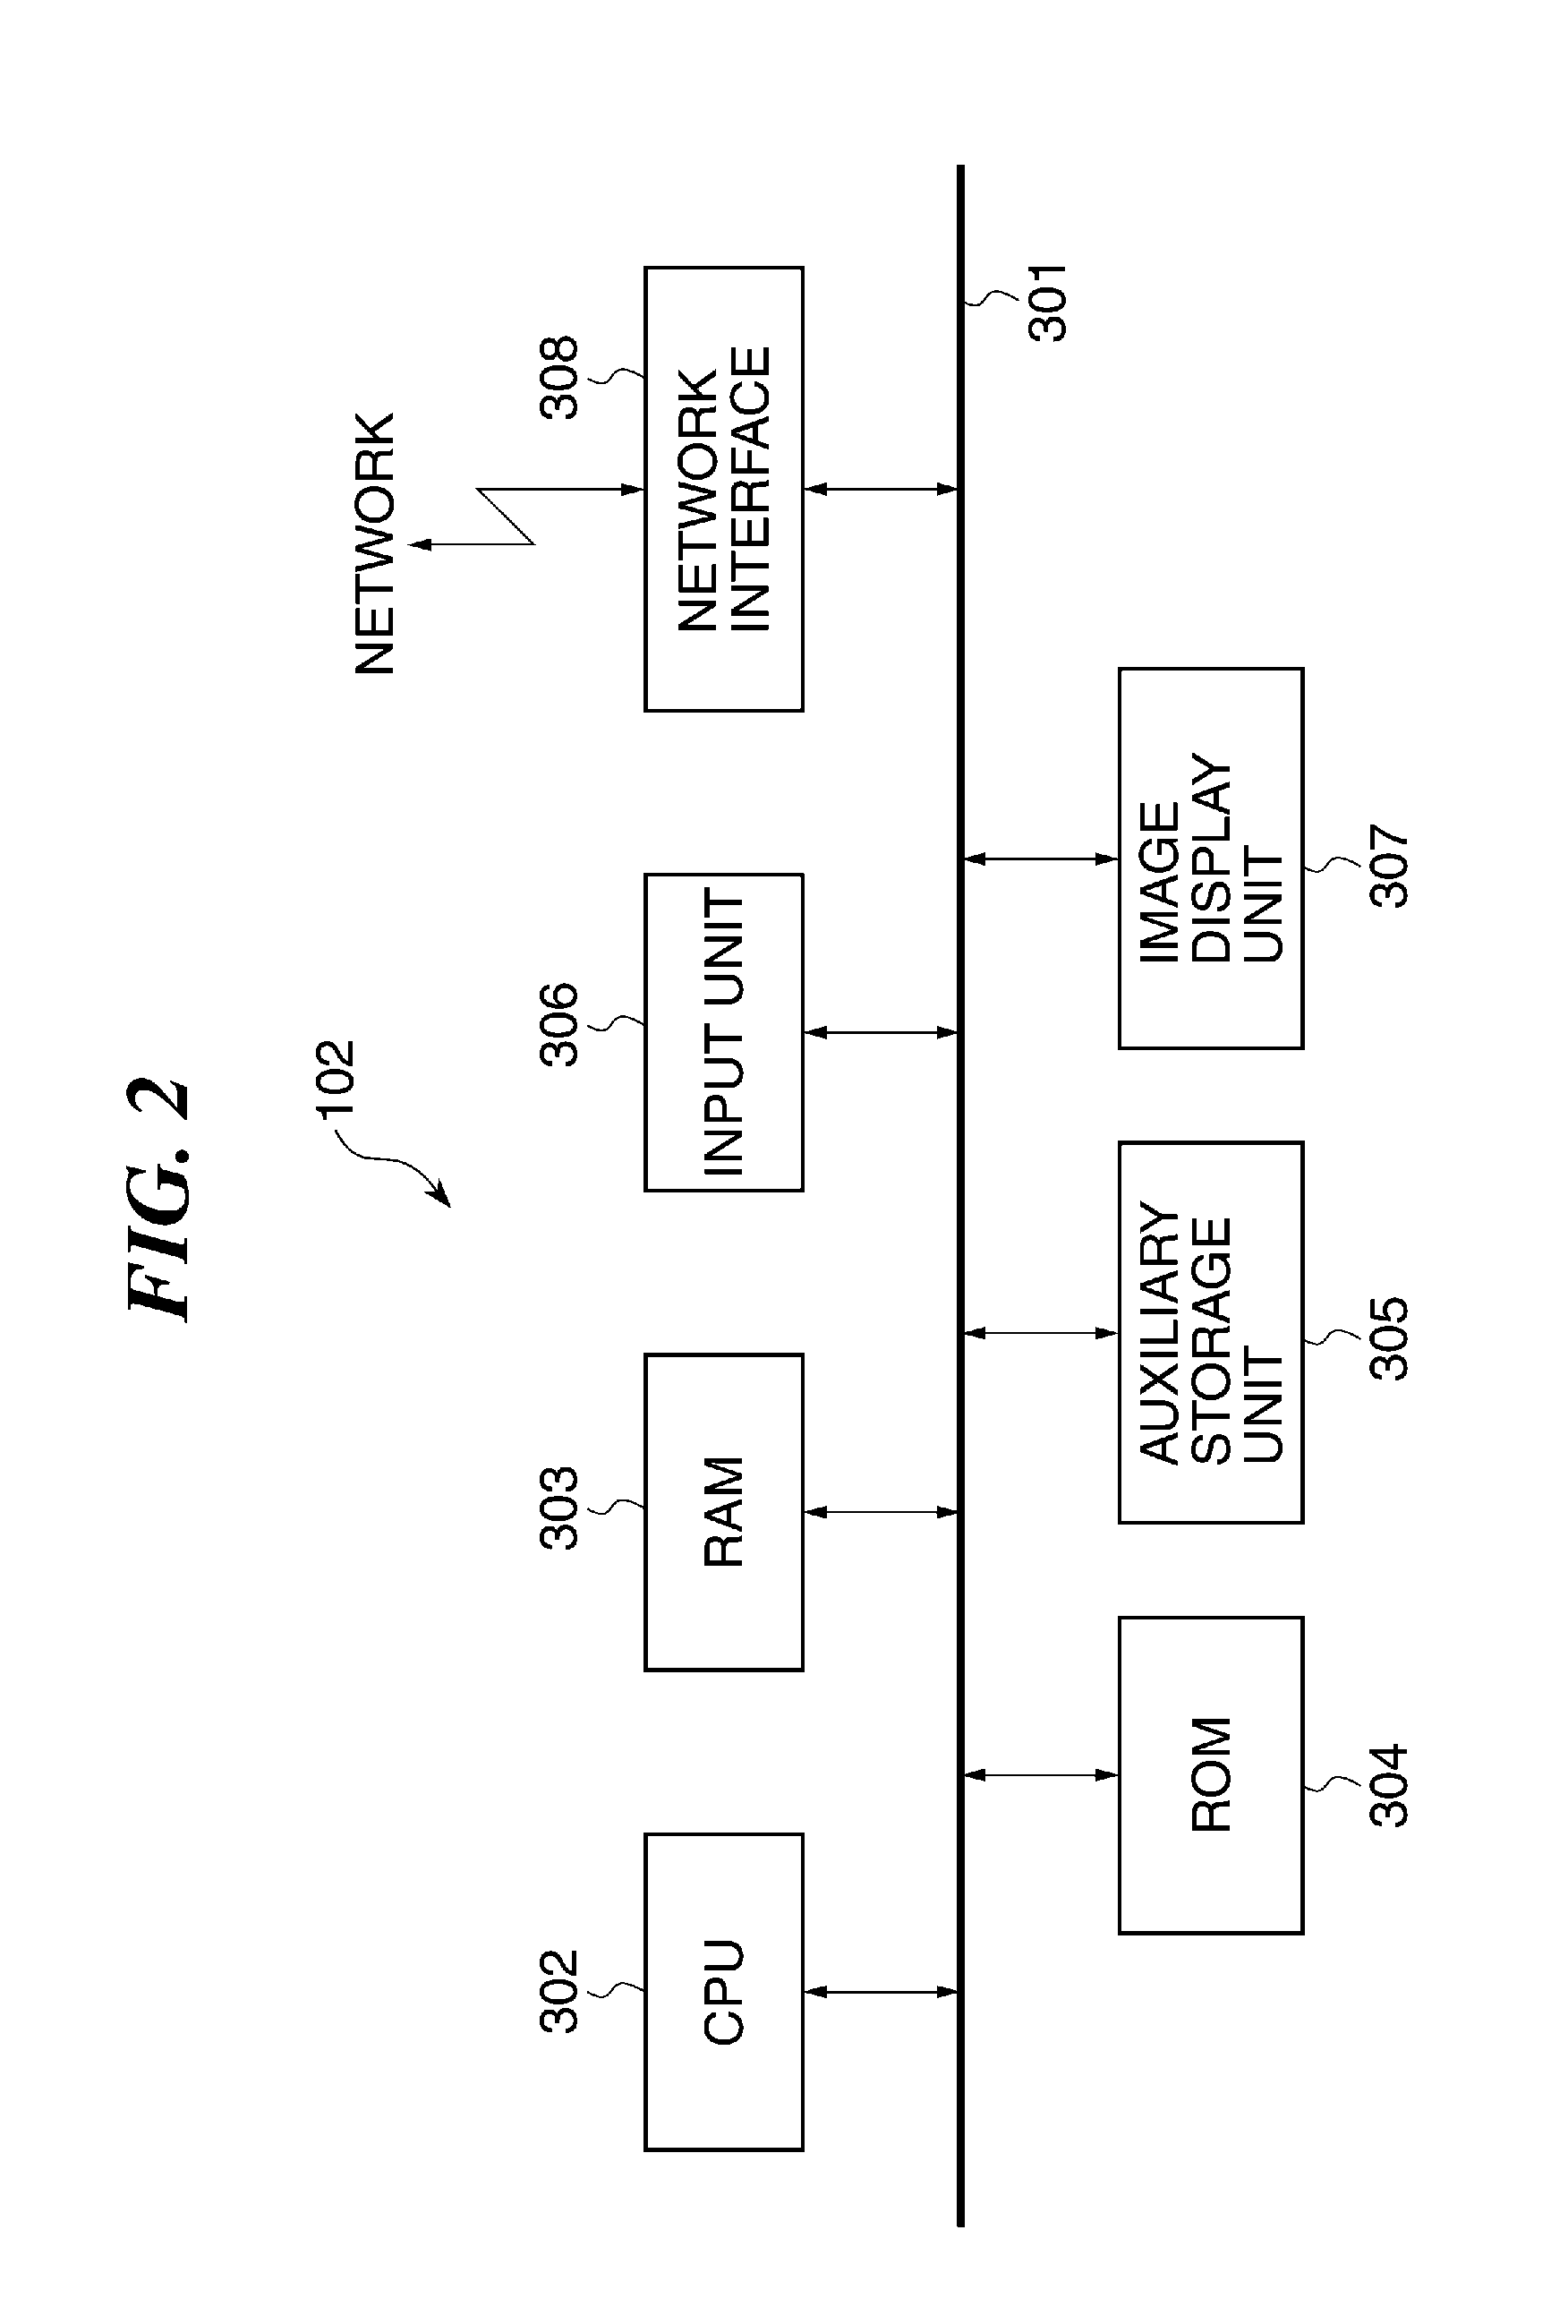 Image forming device capable of exchanging print data with another image forming device, and control method and storage medium therefor